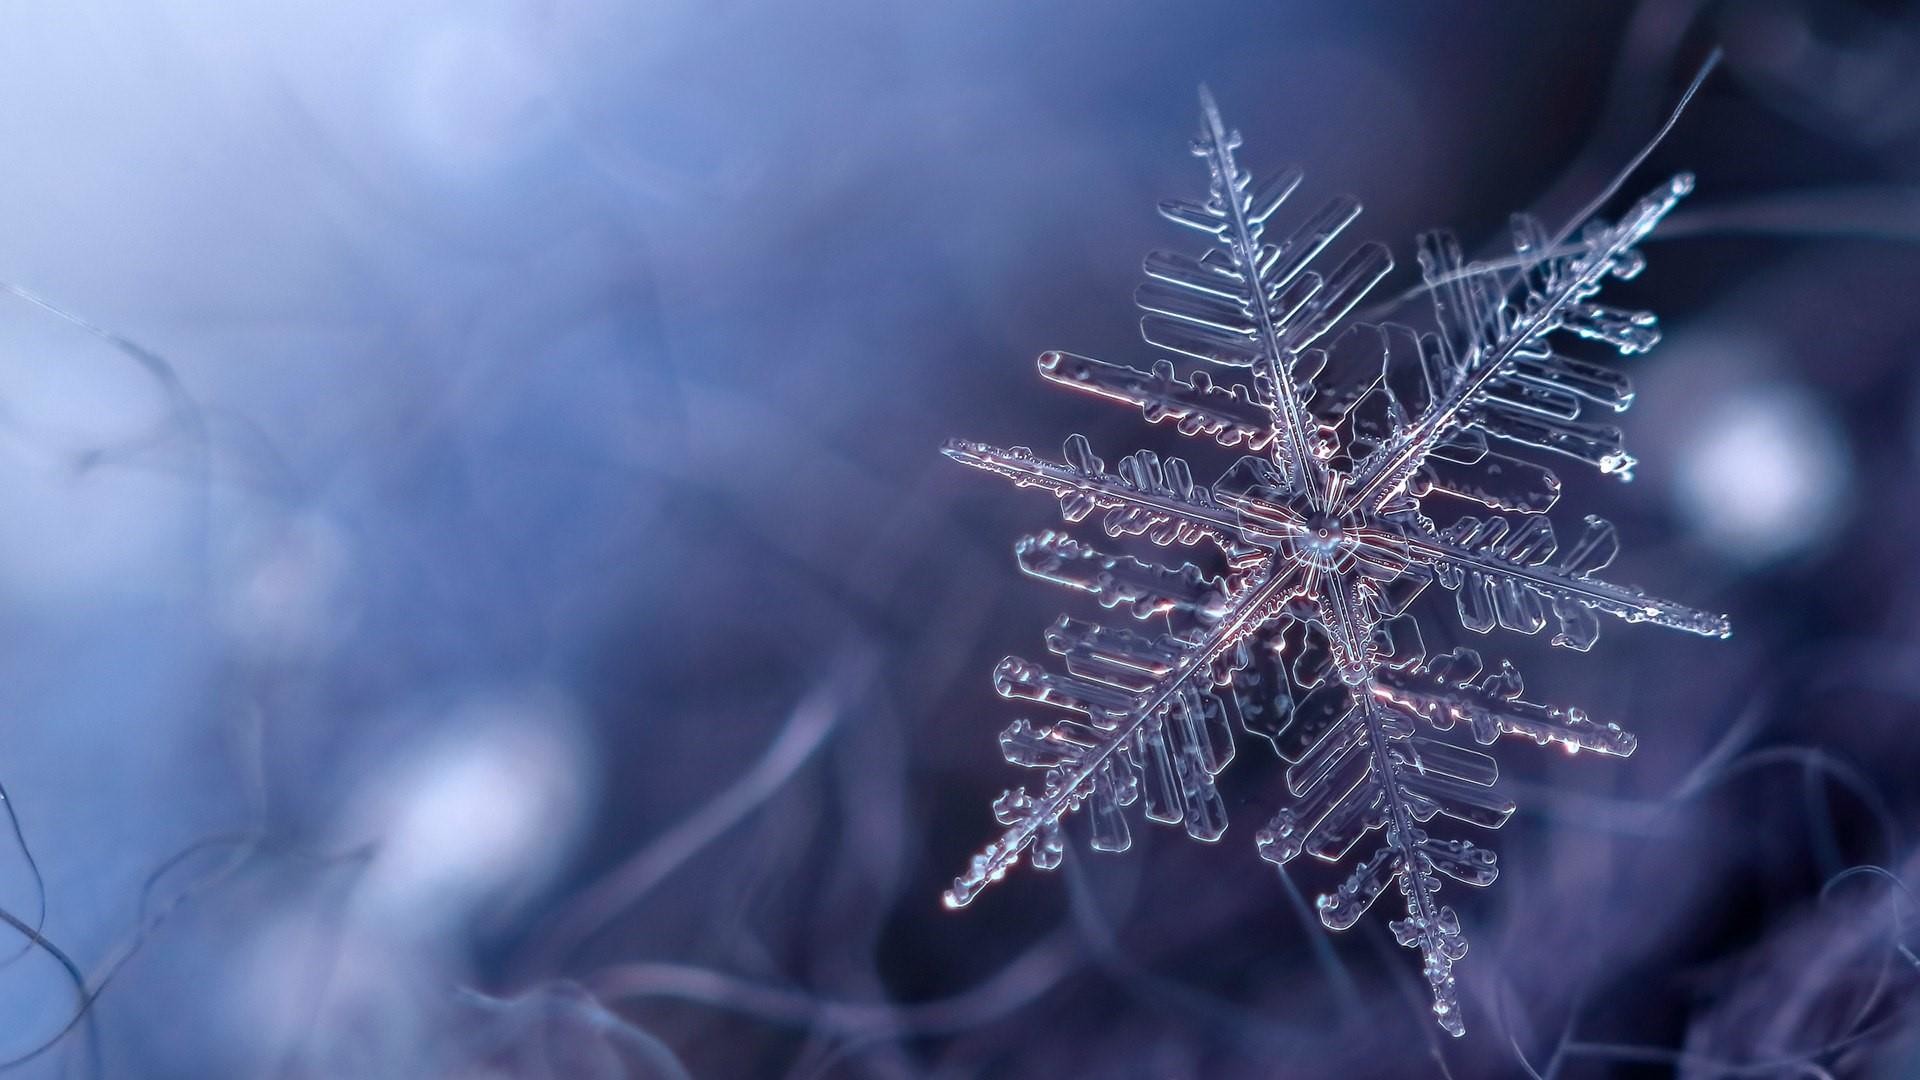 Snowflake Wallpaper Images (72+ images)